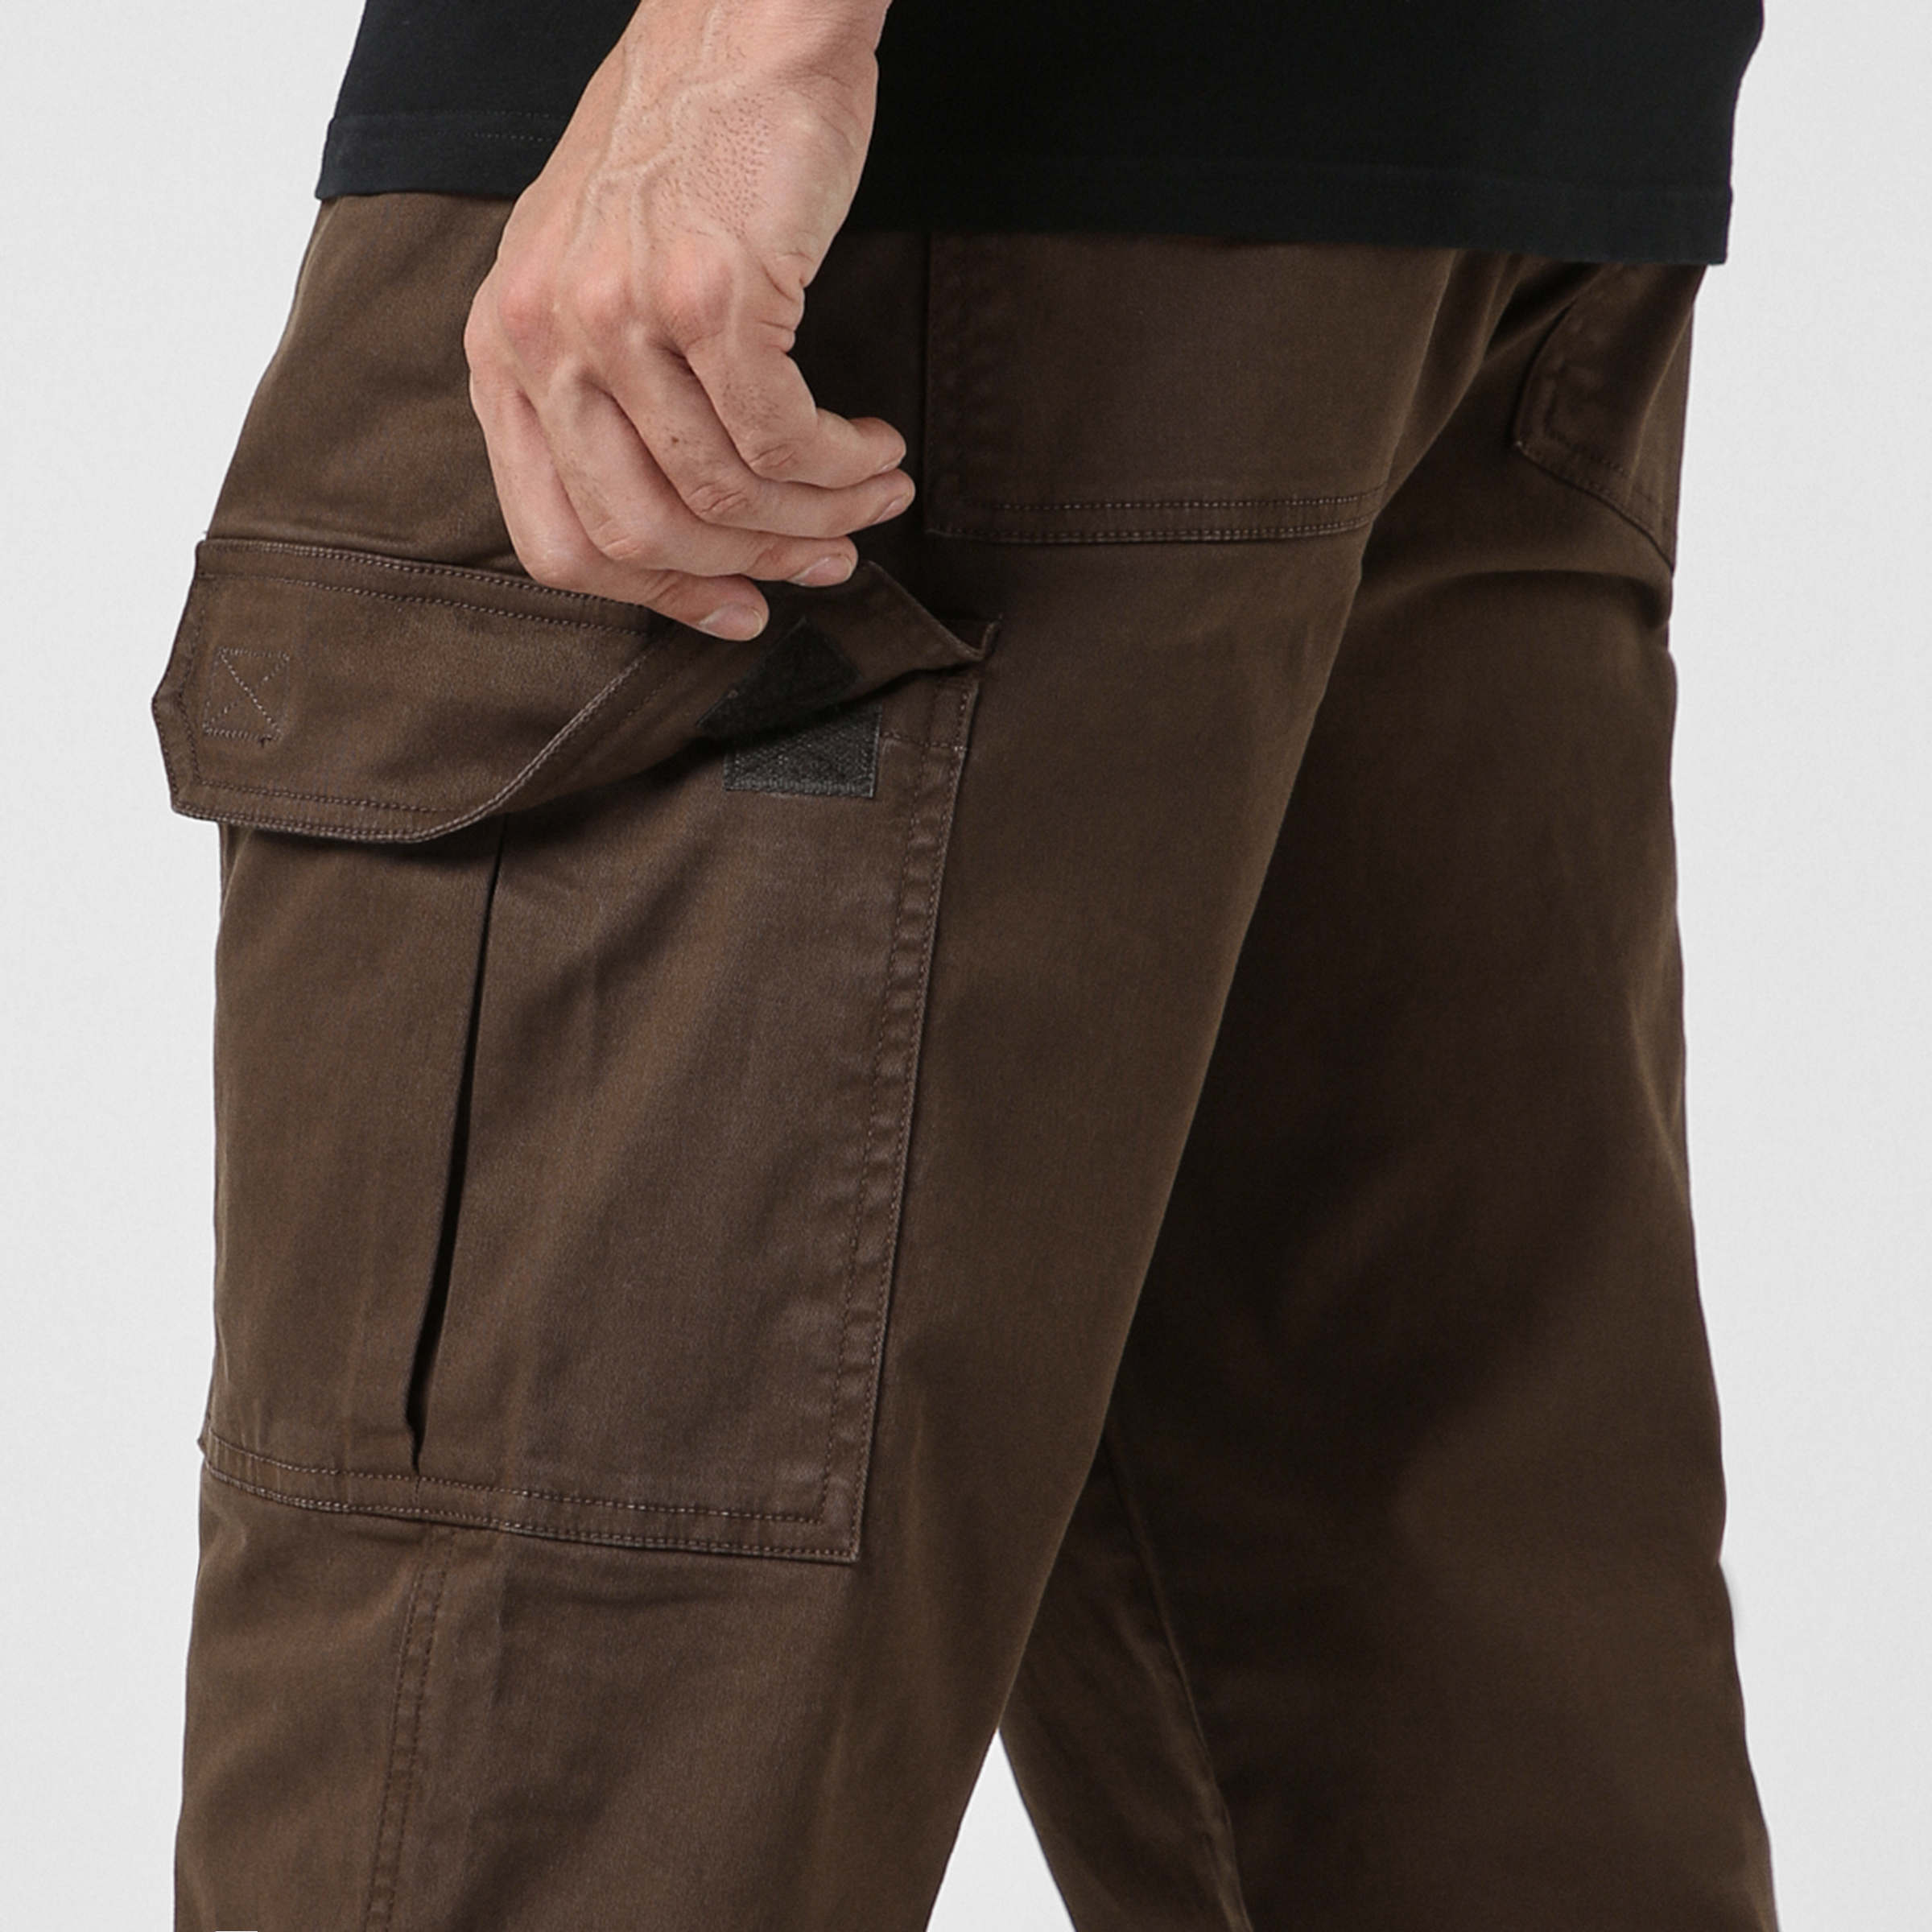 Stretch Cargo Pant Cocoa close up left velcro pocket open